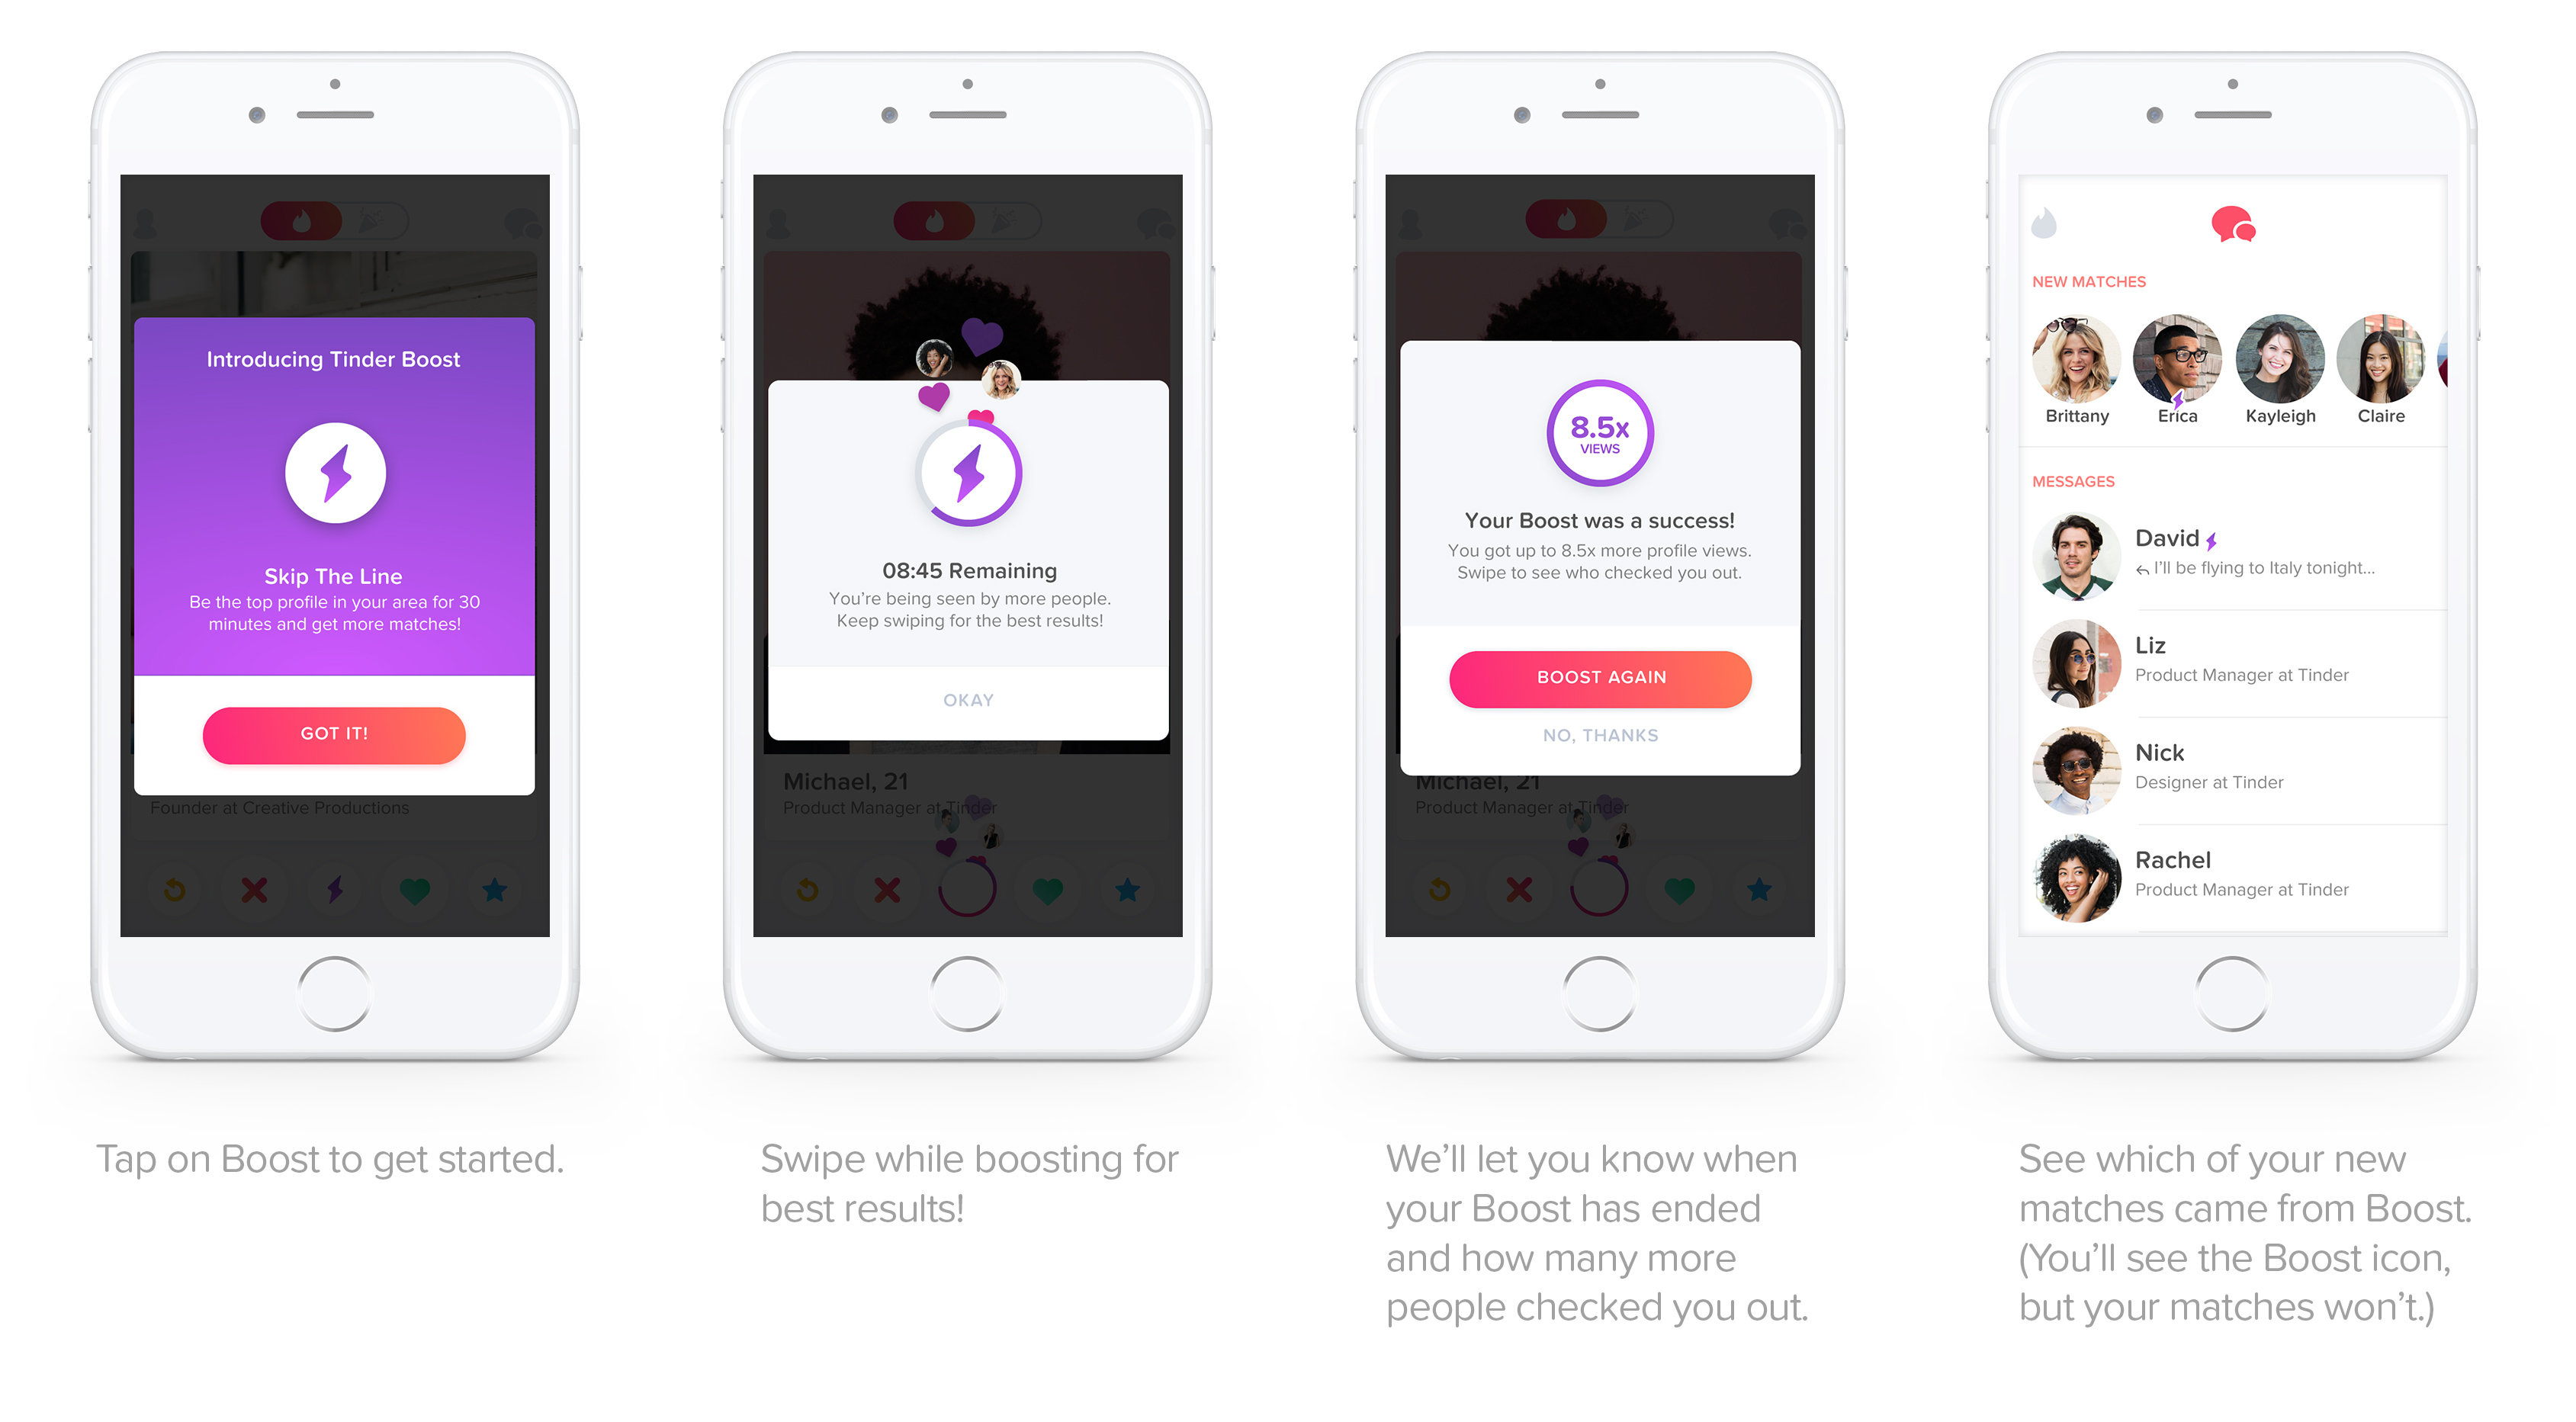 Tinder Boost lets you pay your way to the front of the line.